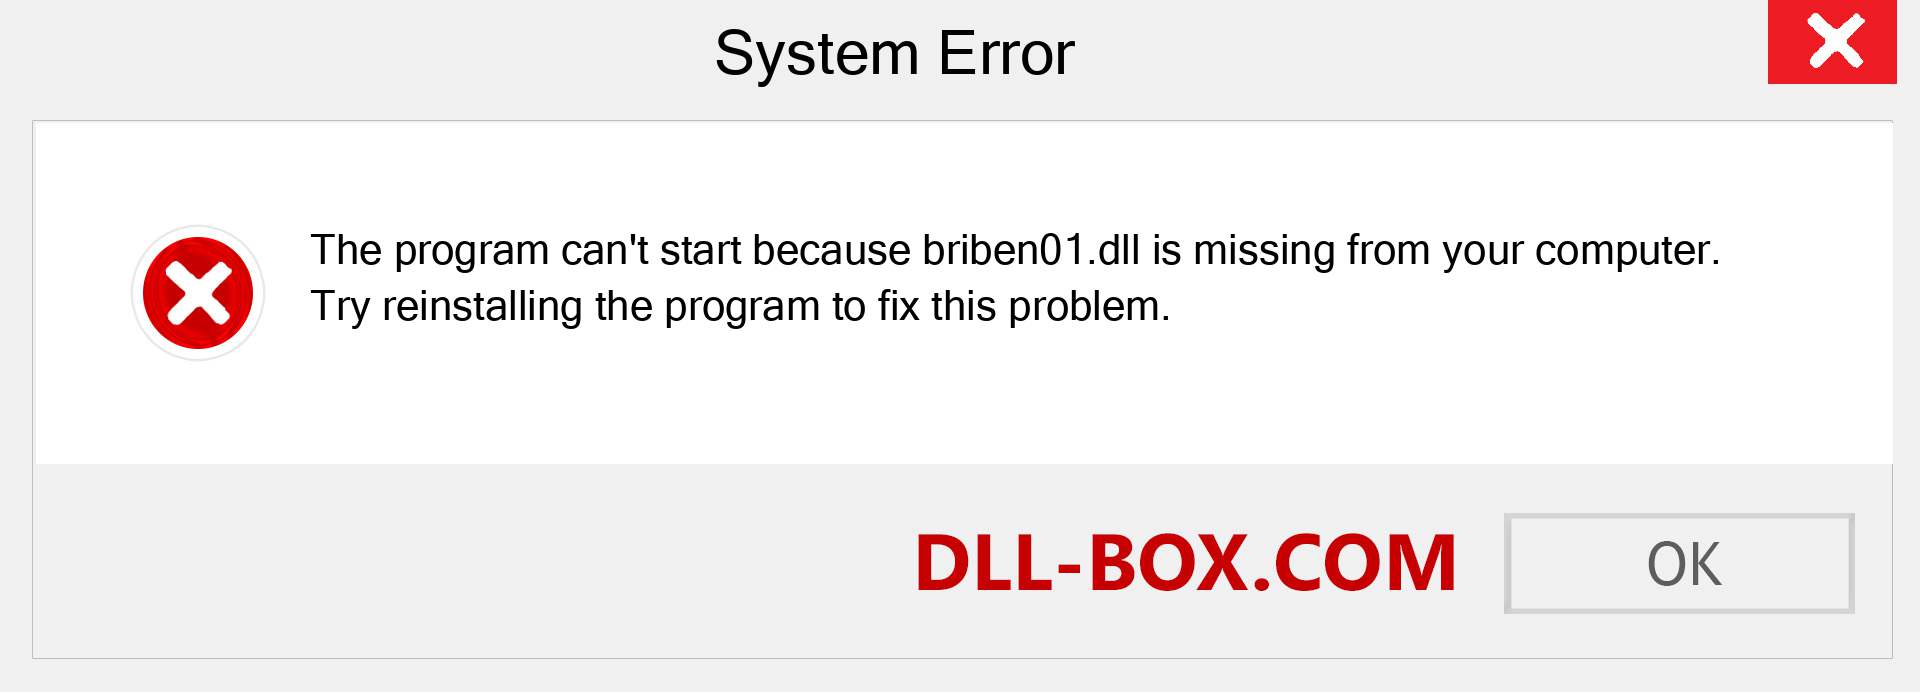  briben01.dll file is missing?. Download for Windows 7, 8, 10 - Fix  briben01 dll Missing Error on Windows, photos, images